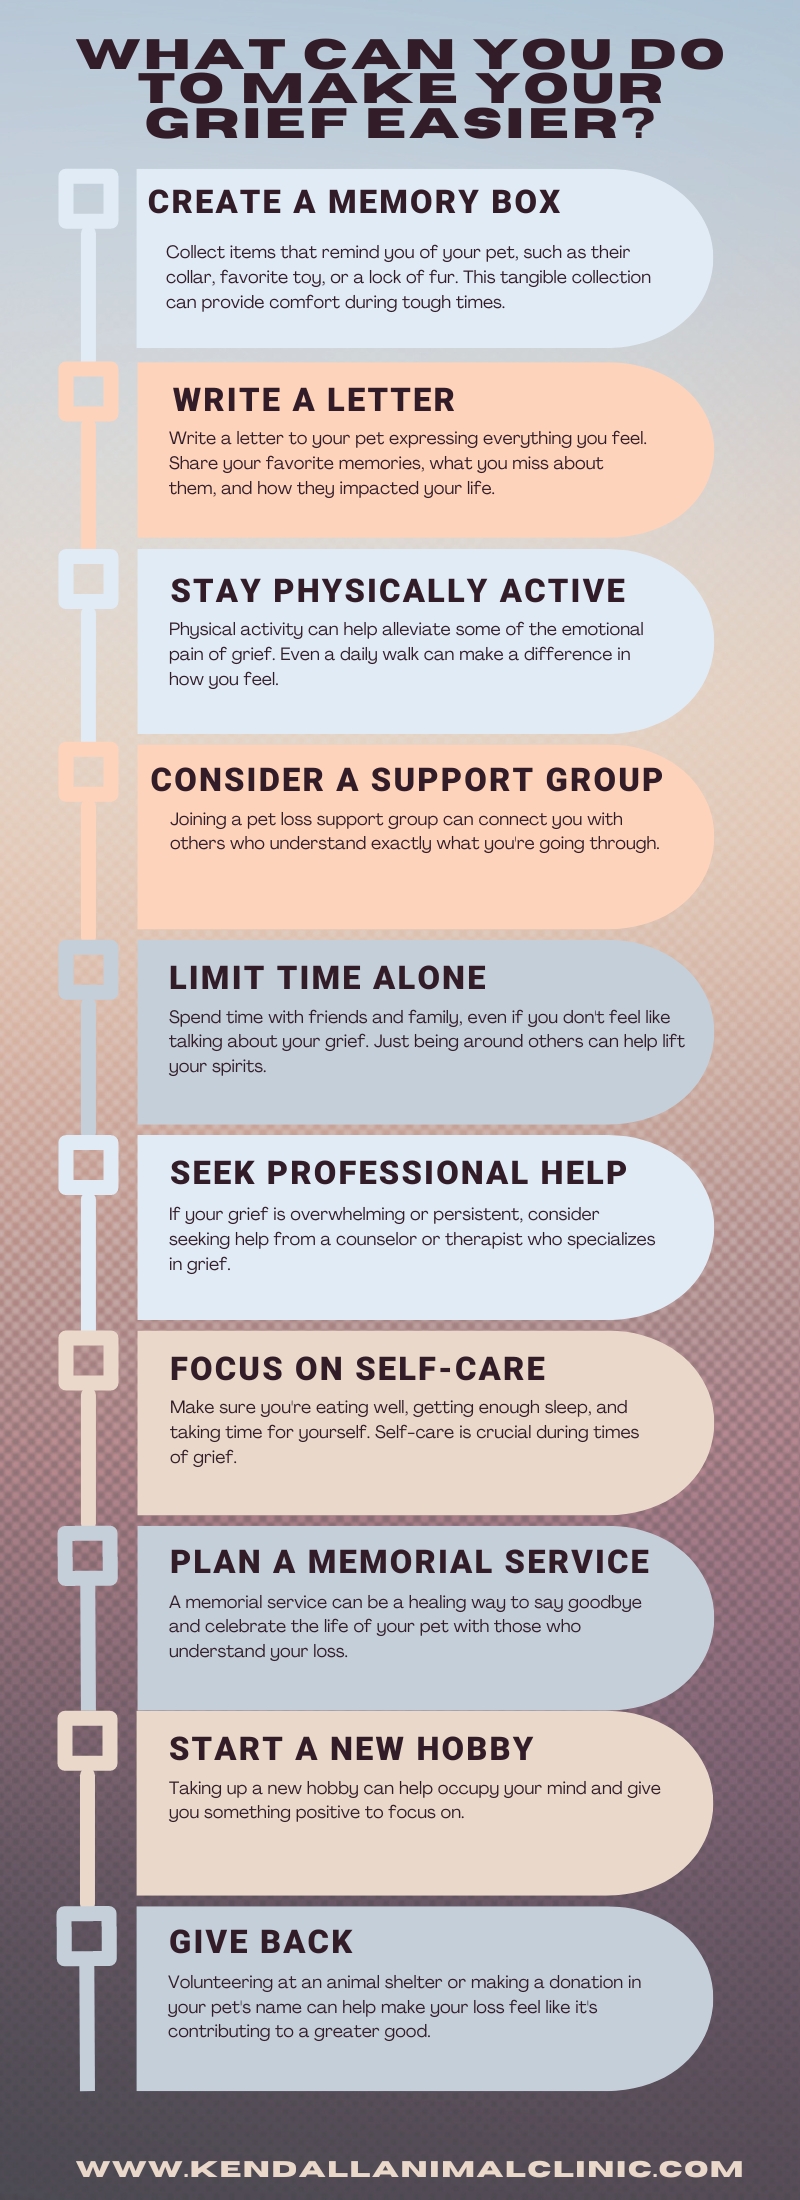 Make Your Grief Easier infographic